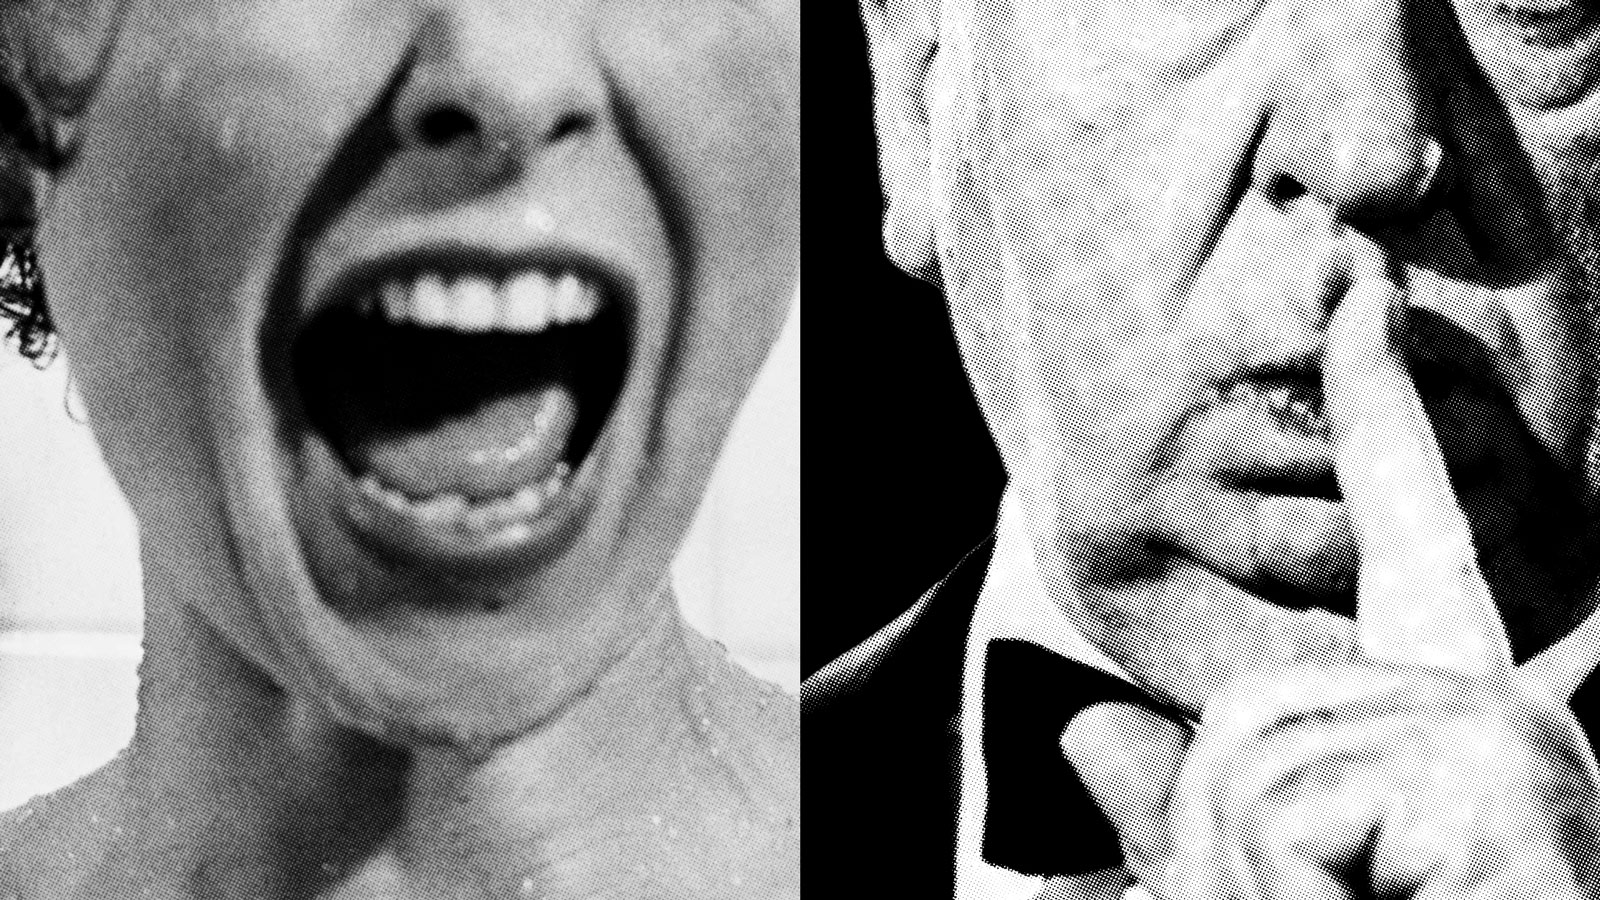 A still of Janet Leigh screaming in Alfred Hitchcock's 'Psycho' beside an image of Alfred Hitchcock holding a finger to his mouth as if shushing someone.